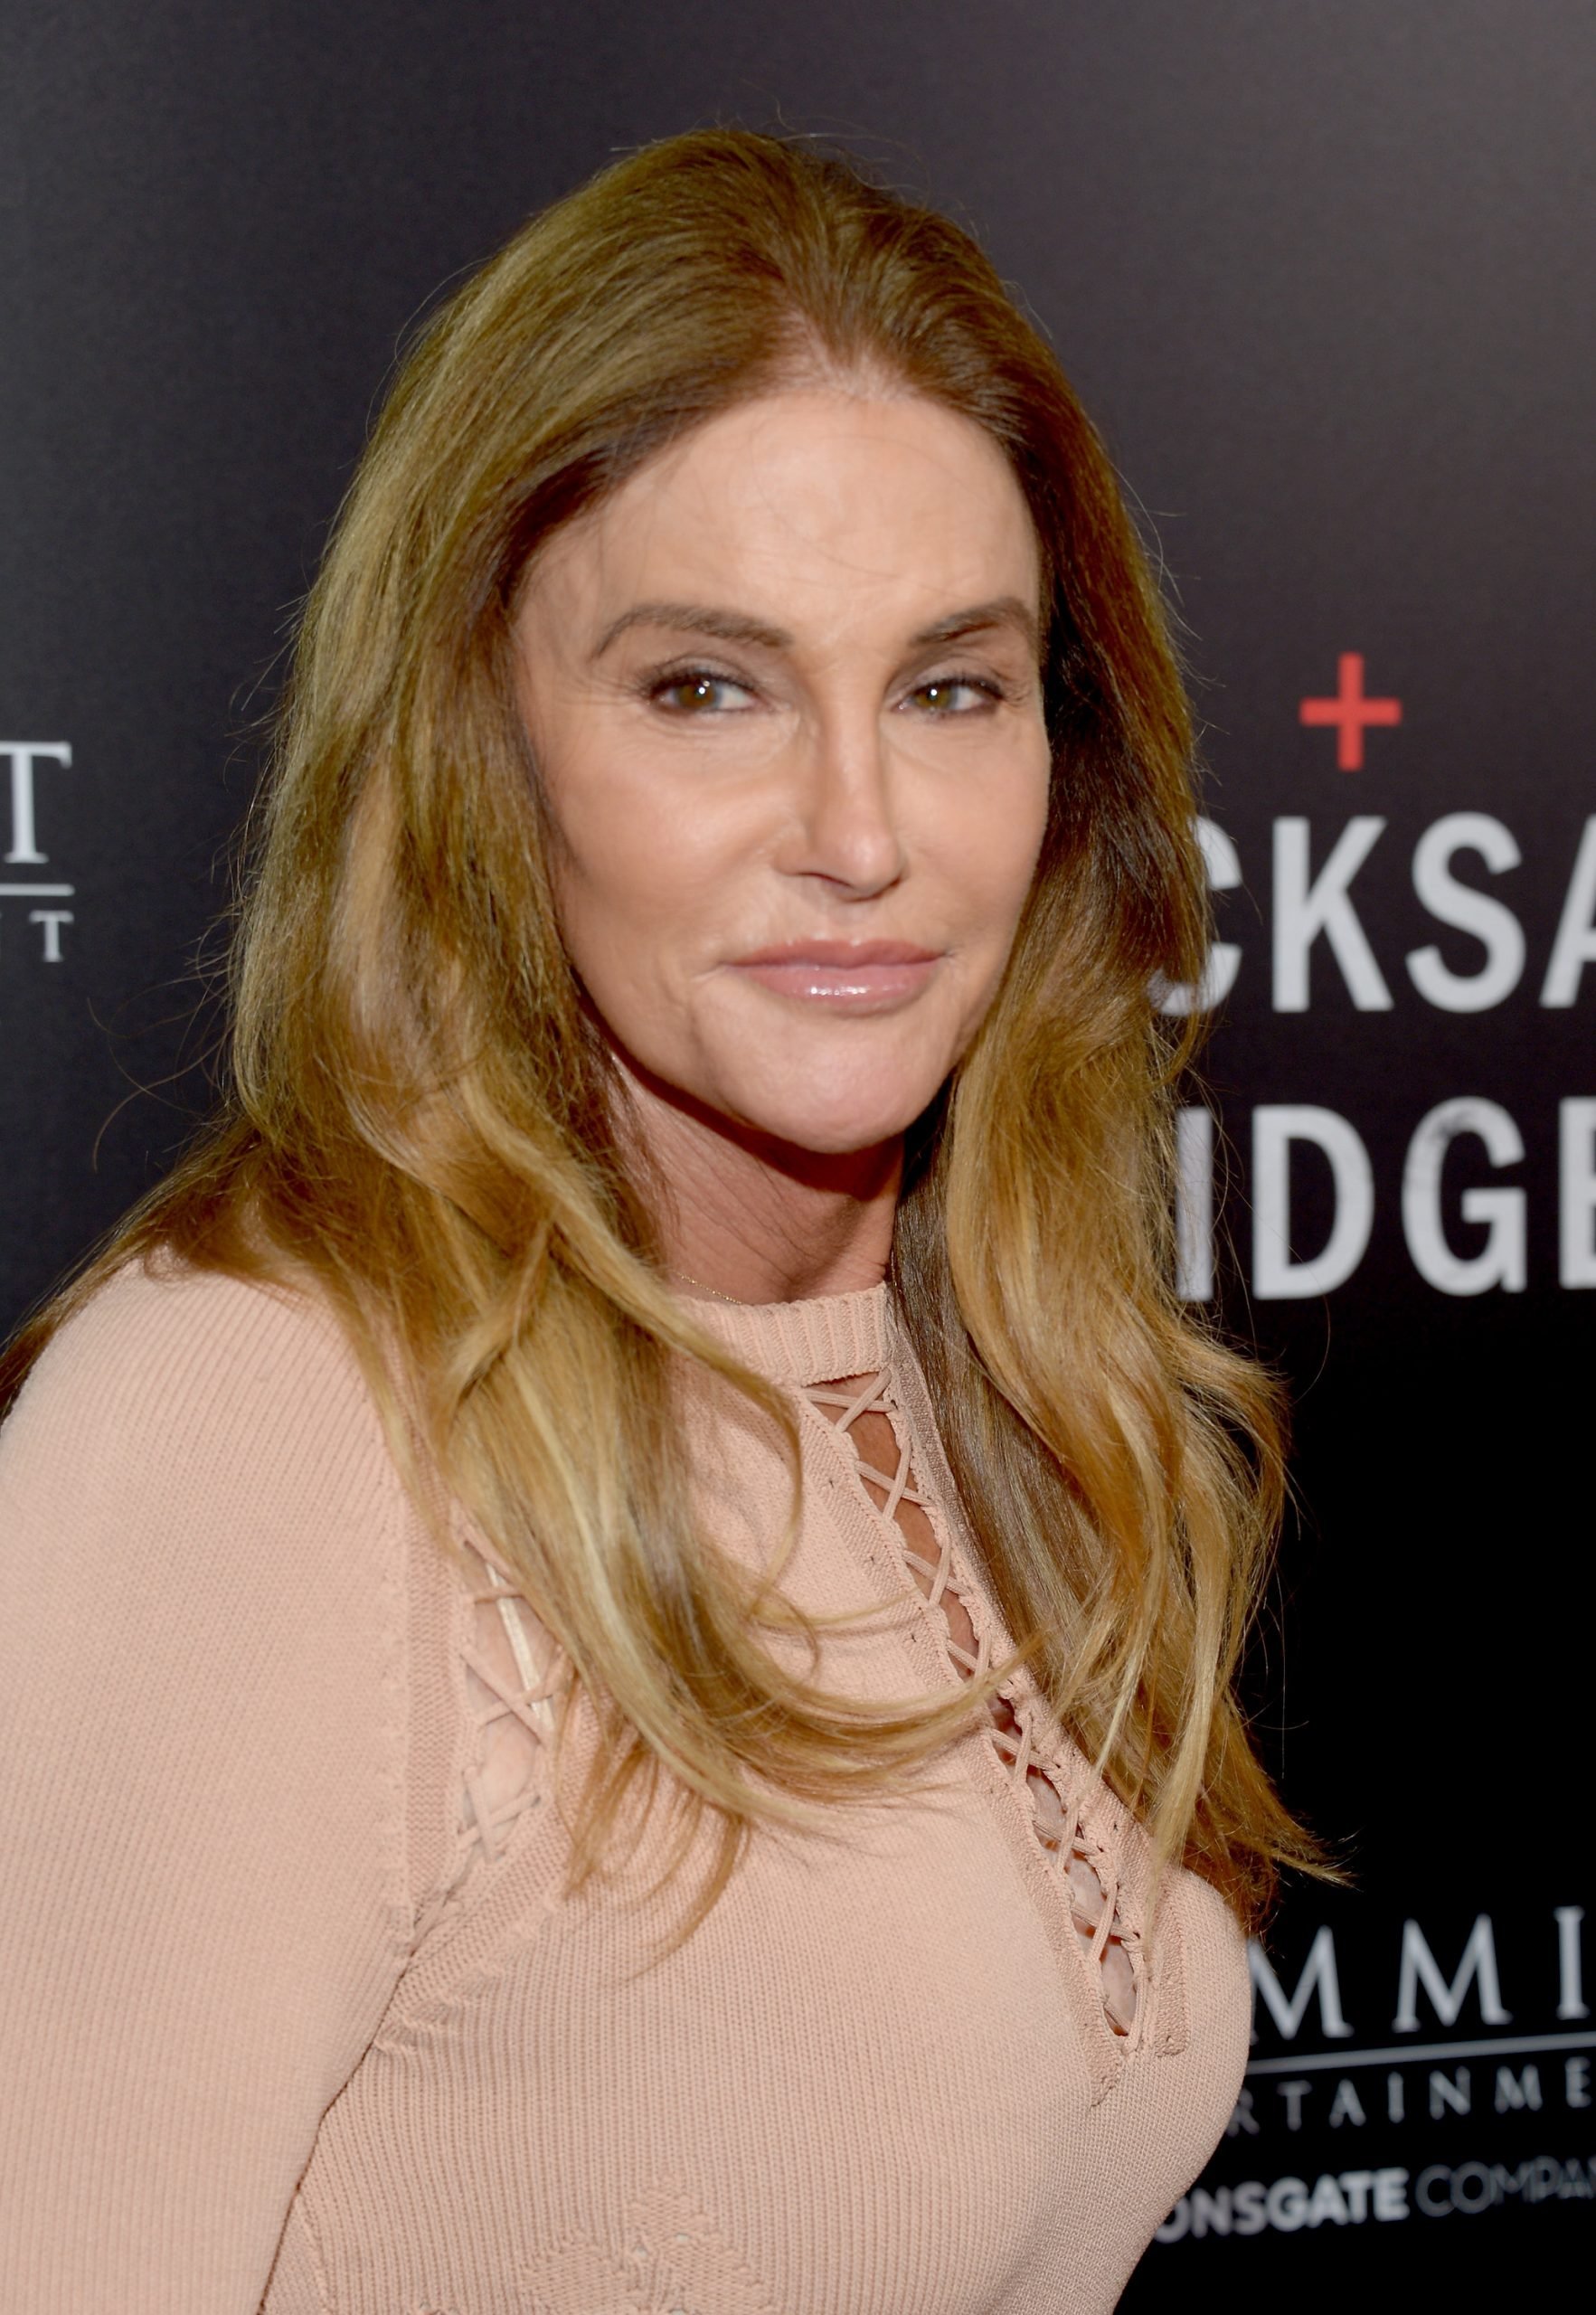 brandi bandy recommends caitlyn jenner nude photos pic